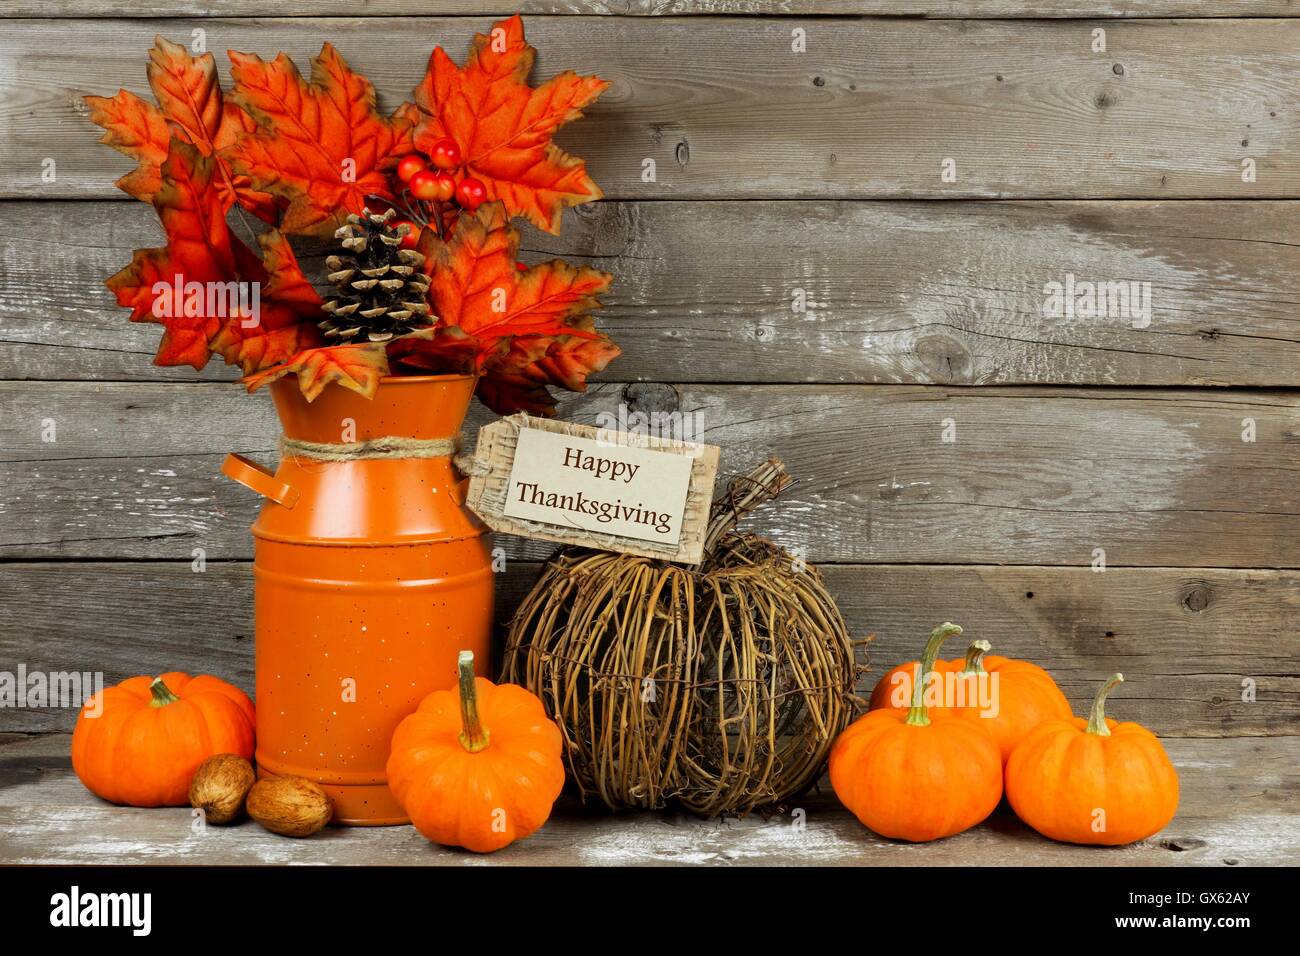 Happy Thanksgiving tag, pumpkins and autumn home decor with rustic wood background Stock Photo